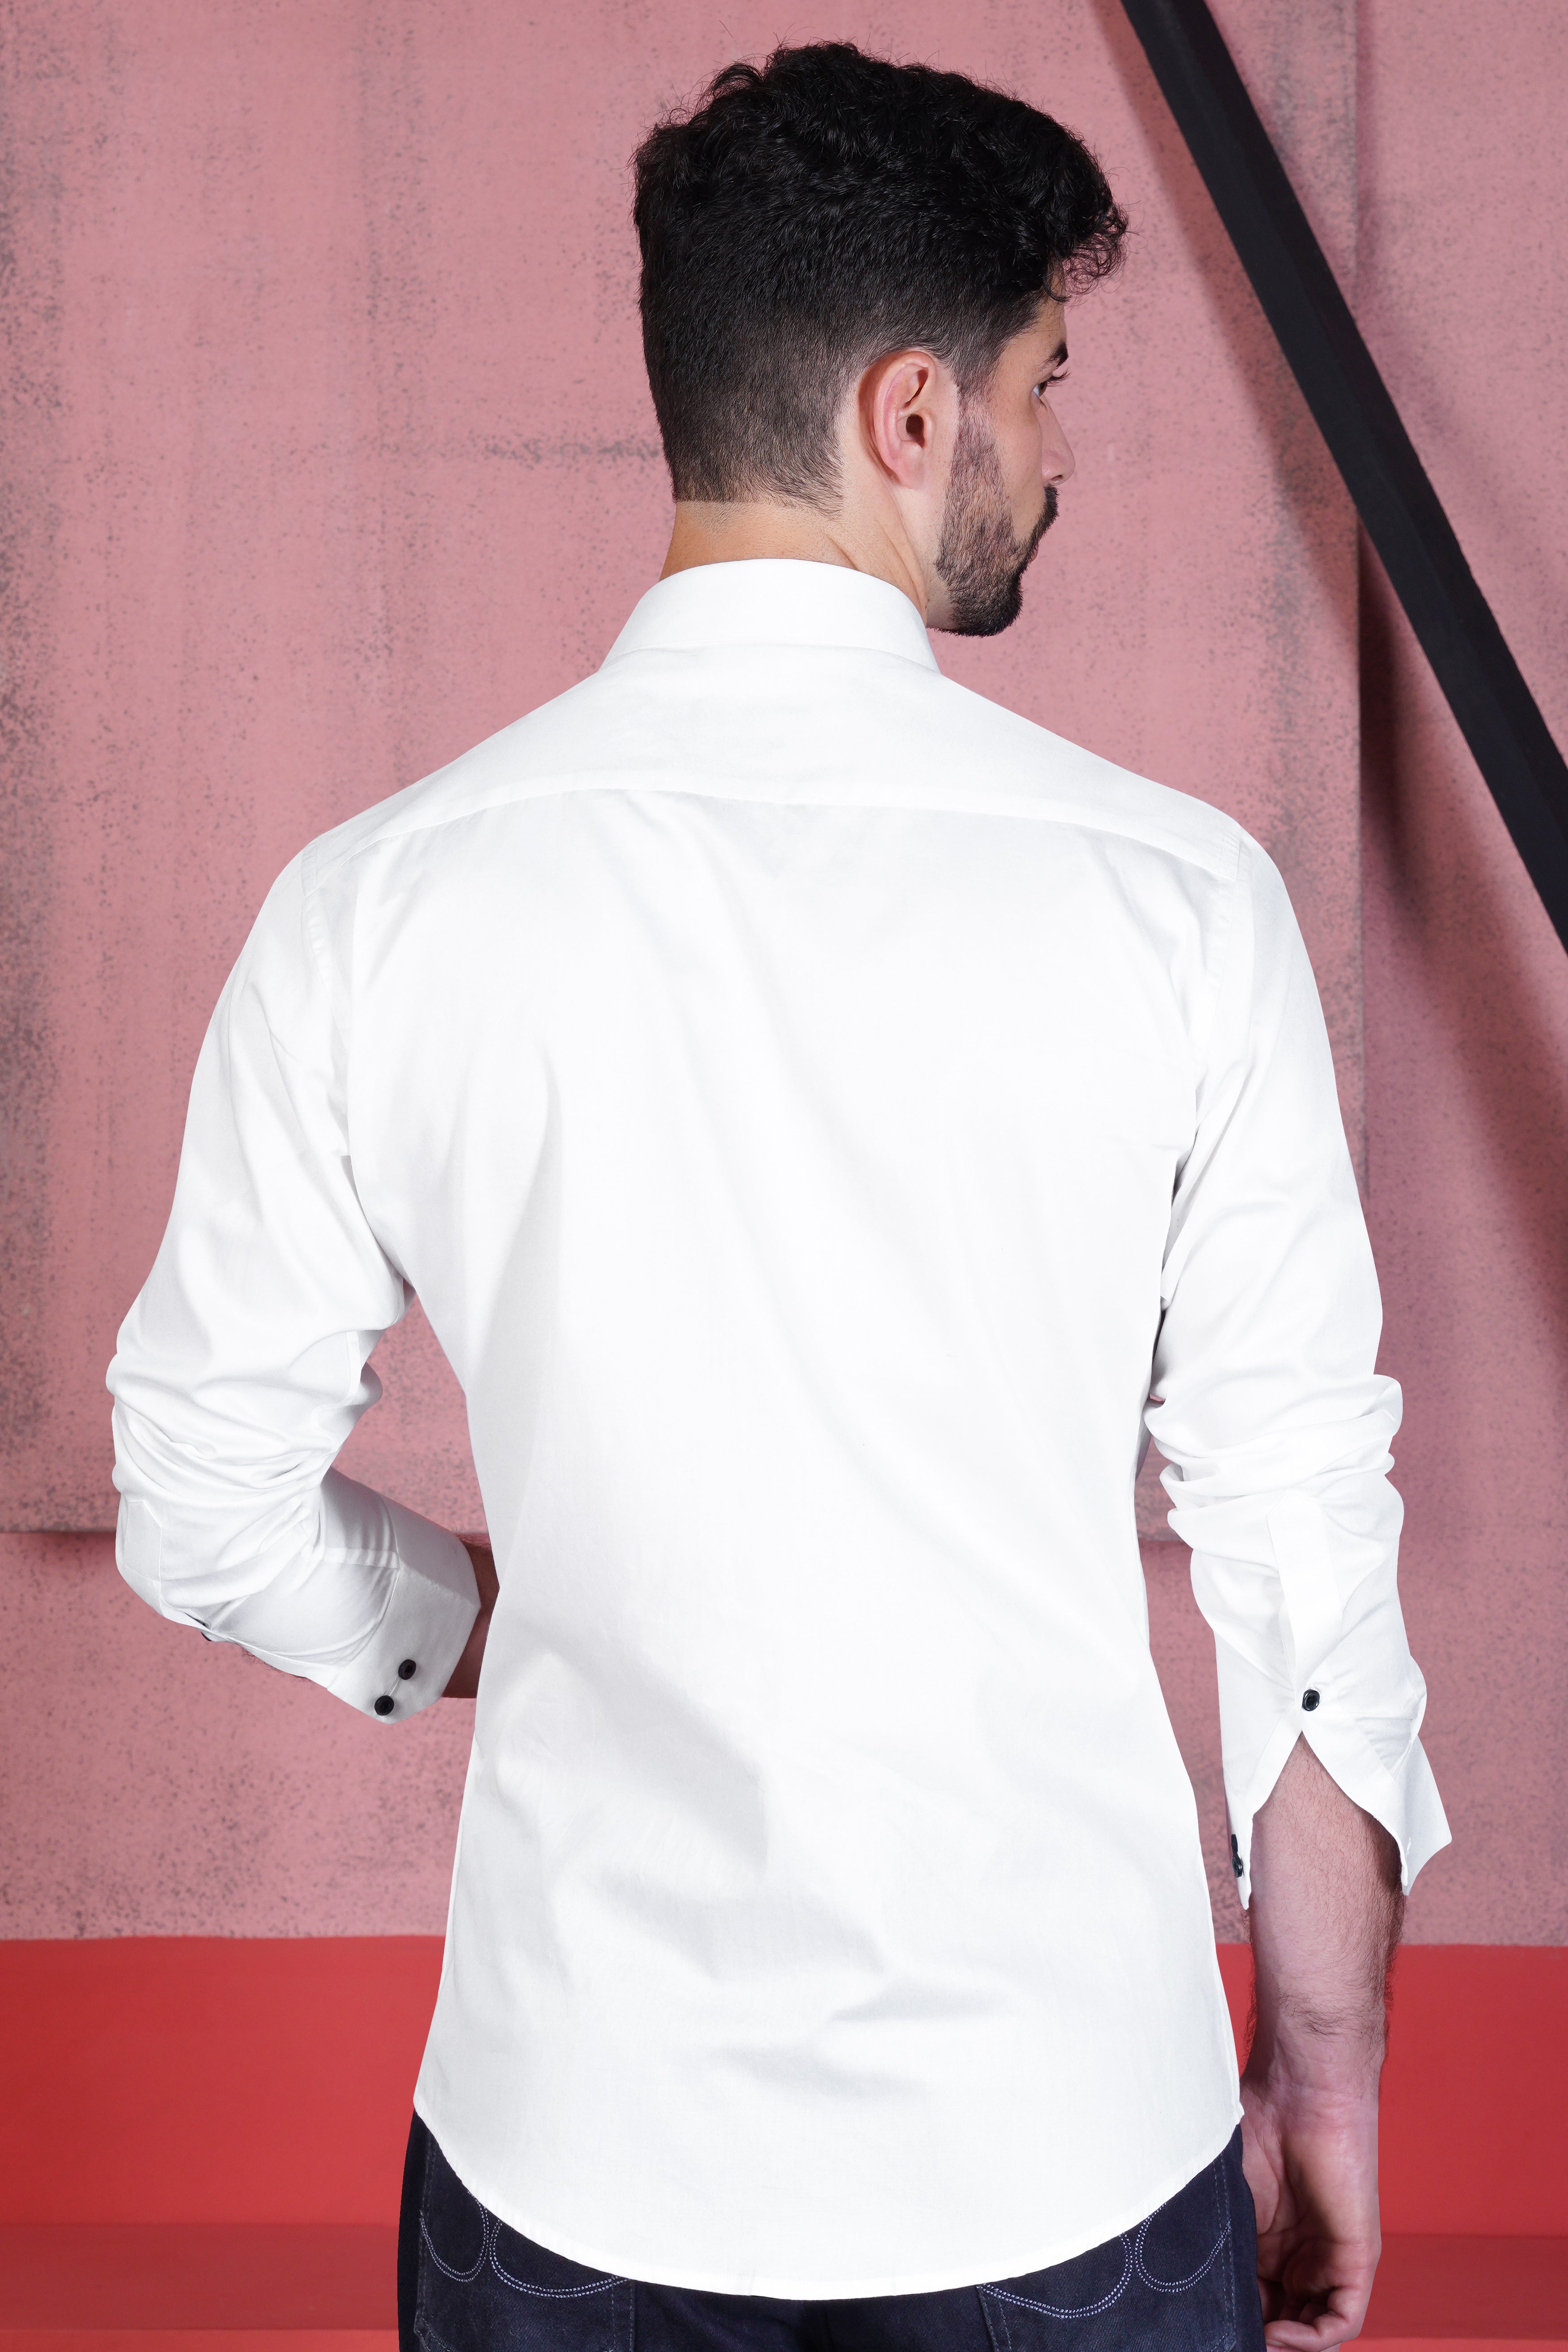 Bright White with Salomie and Black Subtle Sheen Piping Premium Cotton Shirt